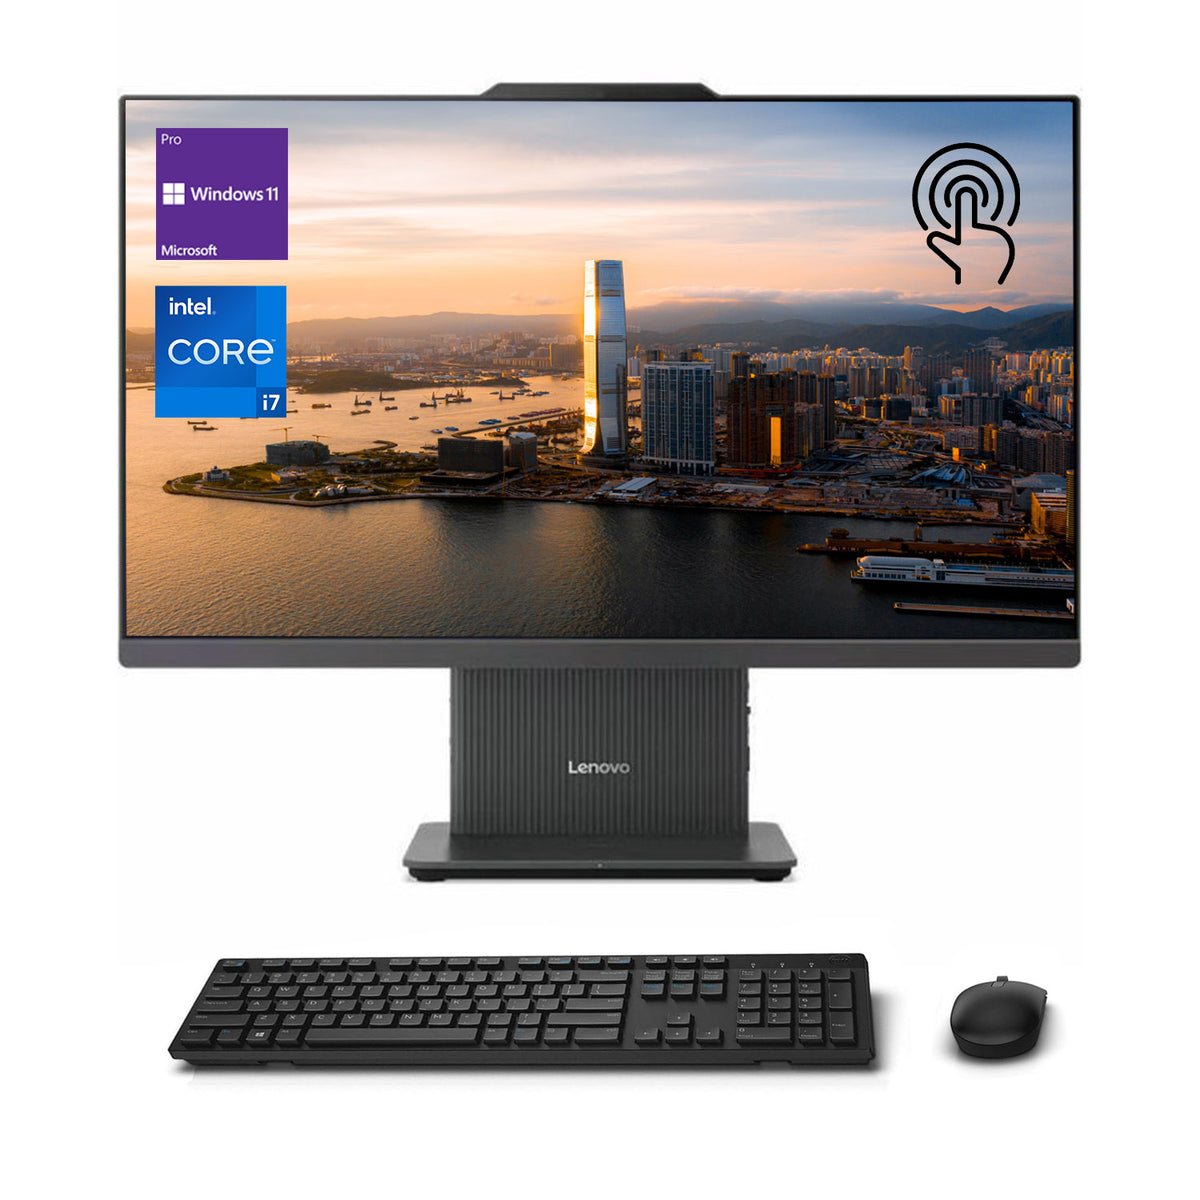 LENOVO IdeaCentre I Gen 9 Daily All-in-One, 27" QHD 2560*1440 Touchscreen 100Hz, Intel Core i7-13620H, Intel UHD Graphics, 16GB DDR5 SODIMM, 1TB PCIe M.2 SSD, Wi-Fi 6, Non-backlit Keyboard, Windows 11 Home, Grey